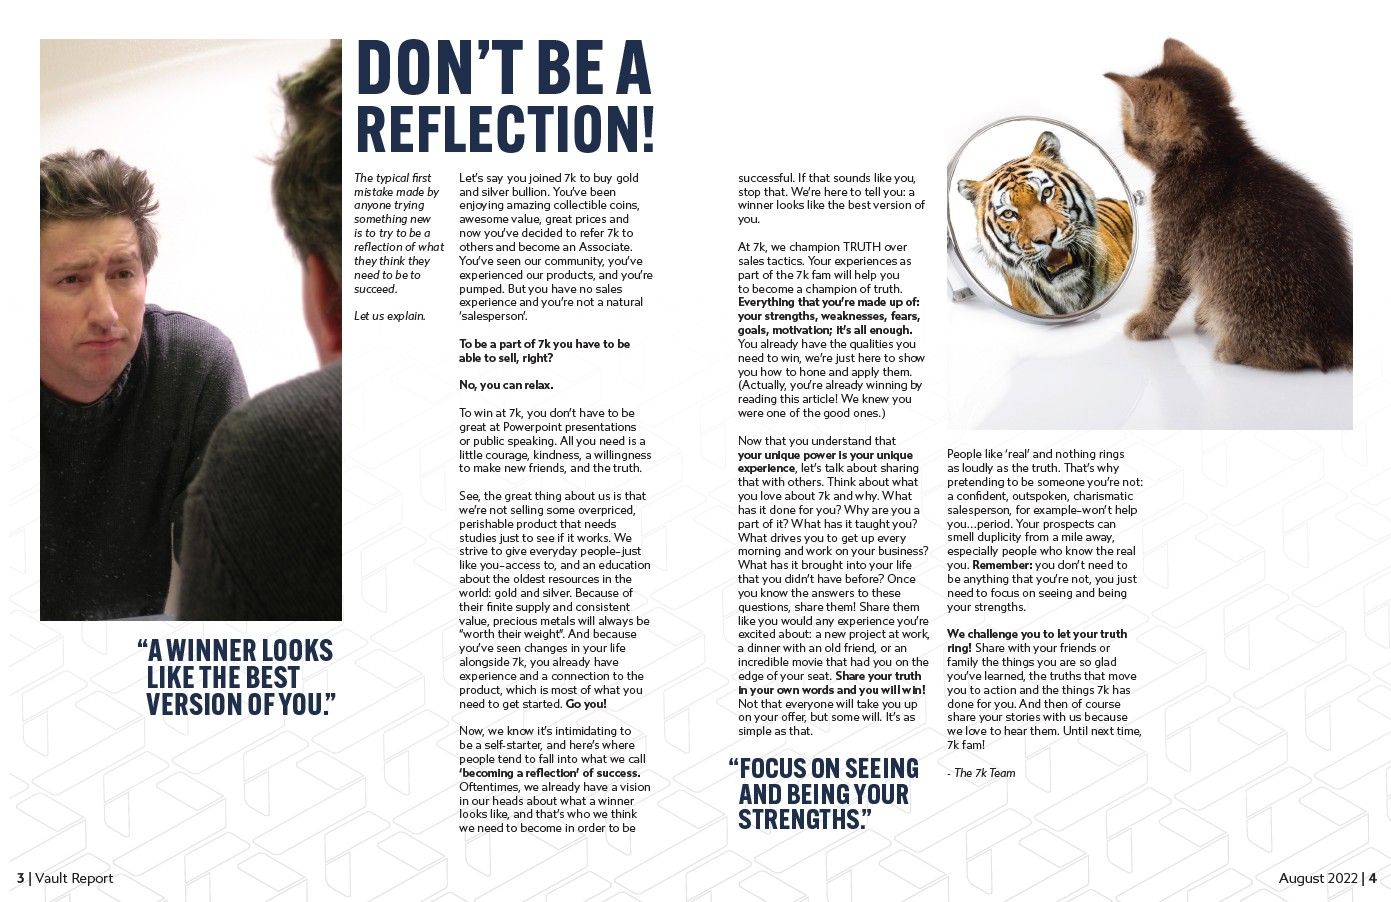 Don't Be a Reflection - Business Training Article